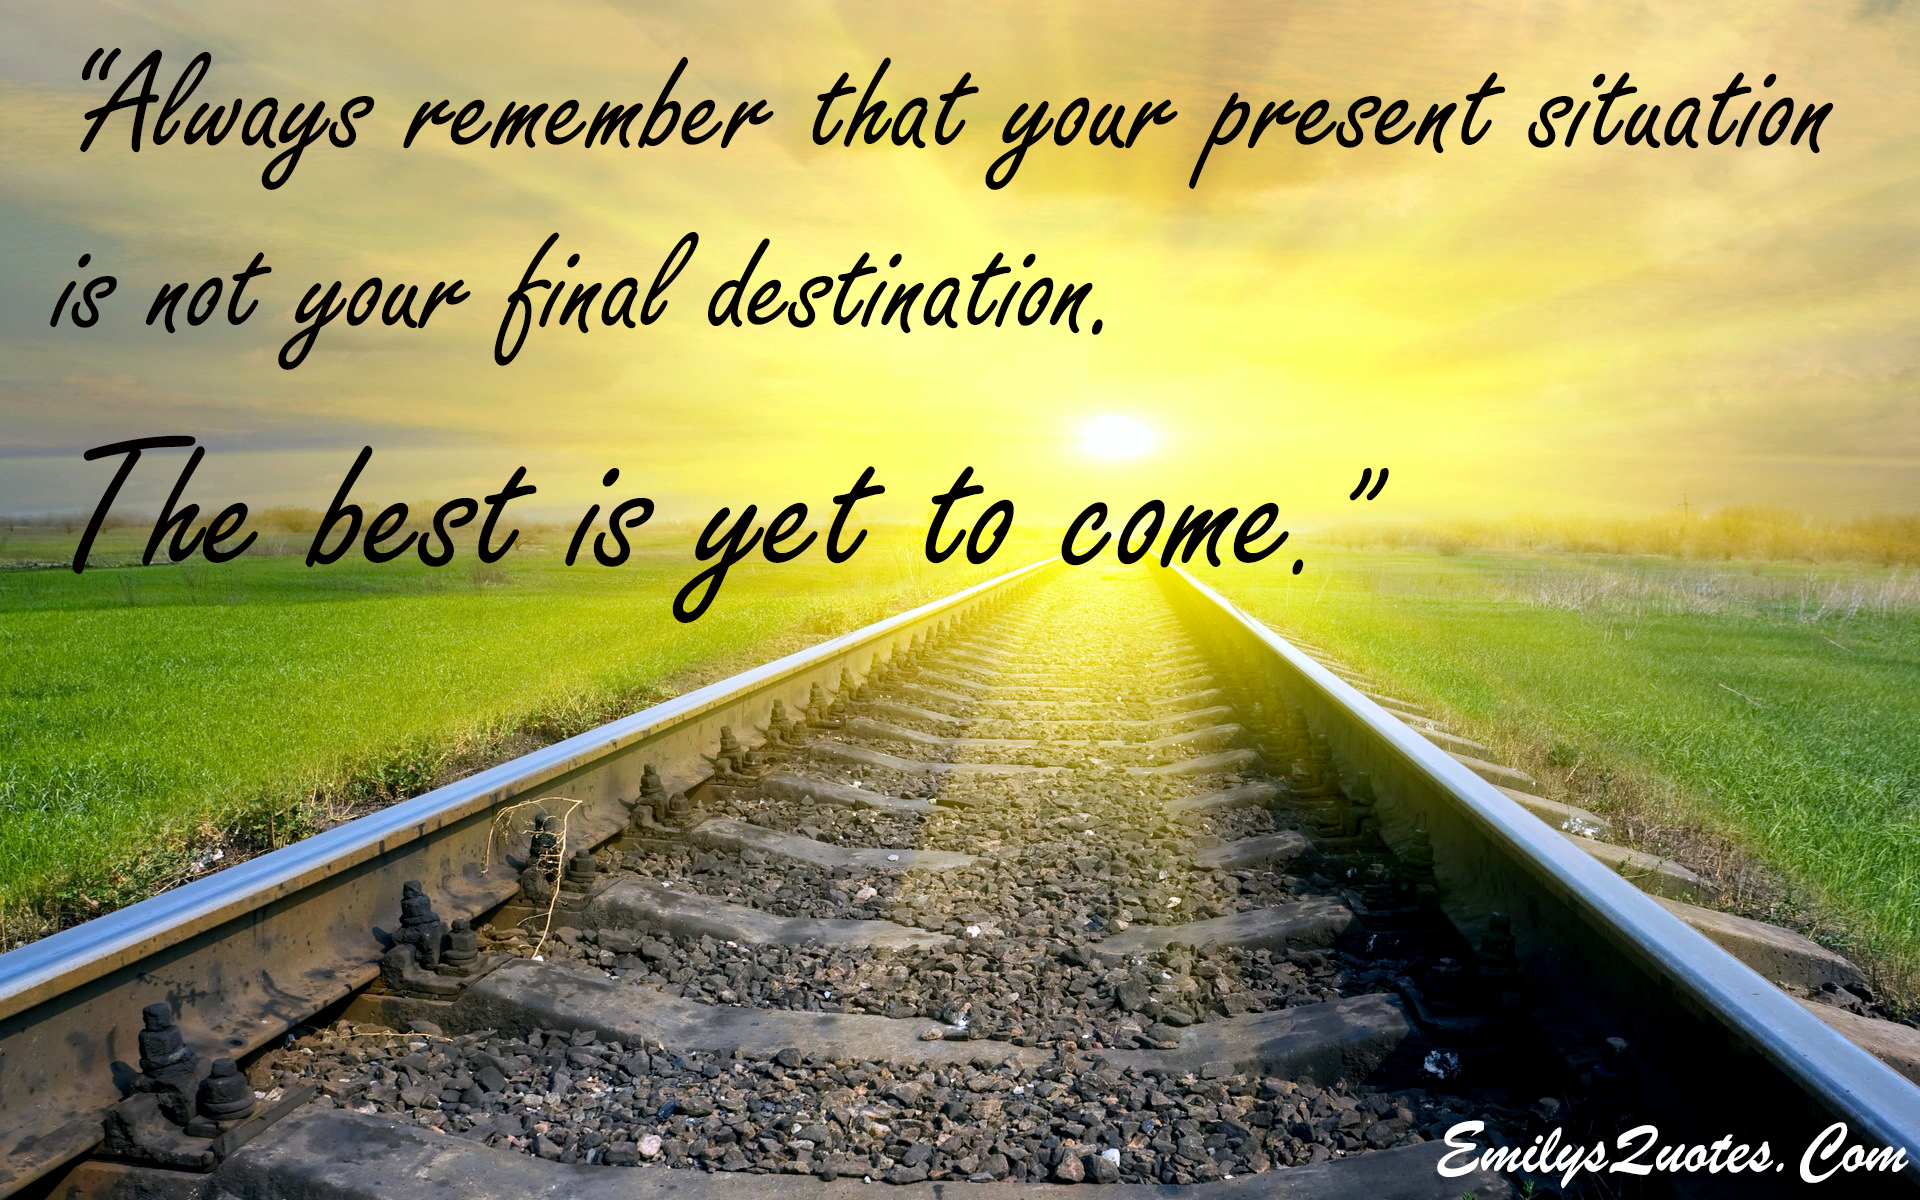 Always remember that your present situation is not your final destination. The best is yet to come